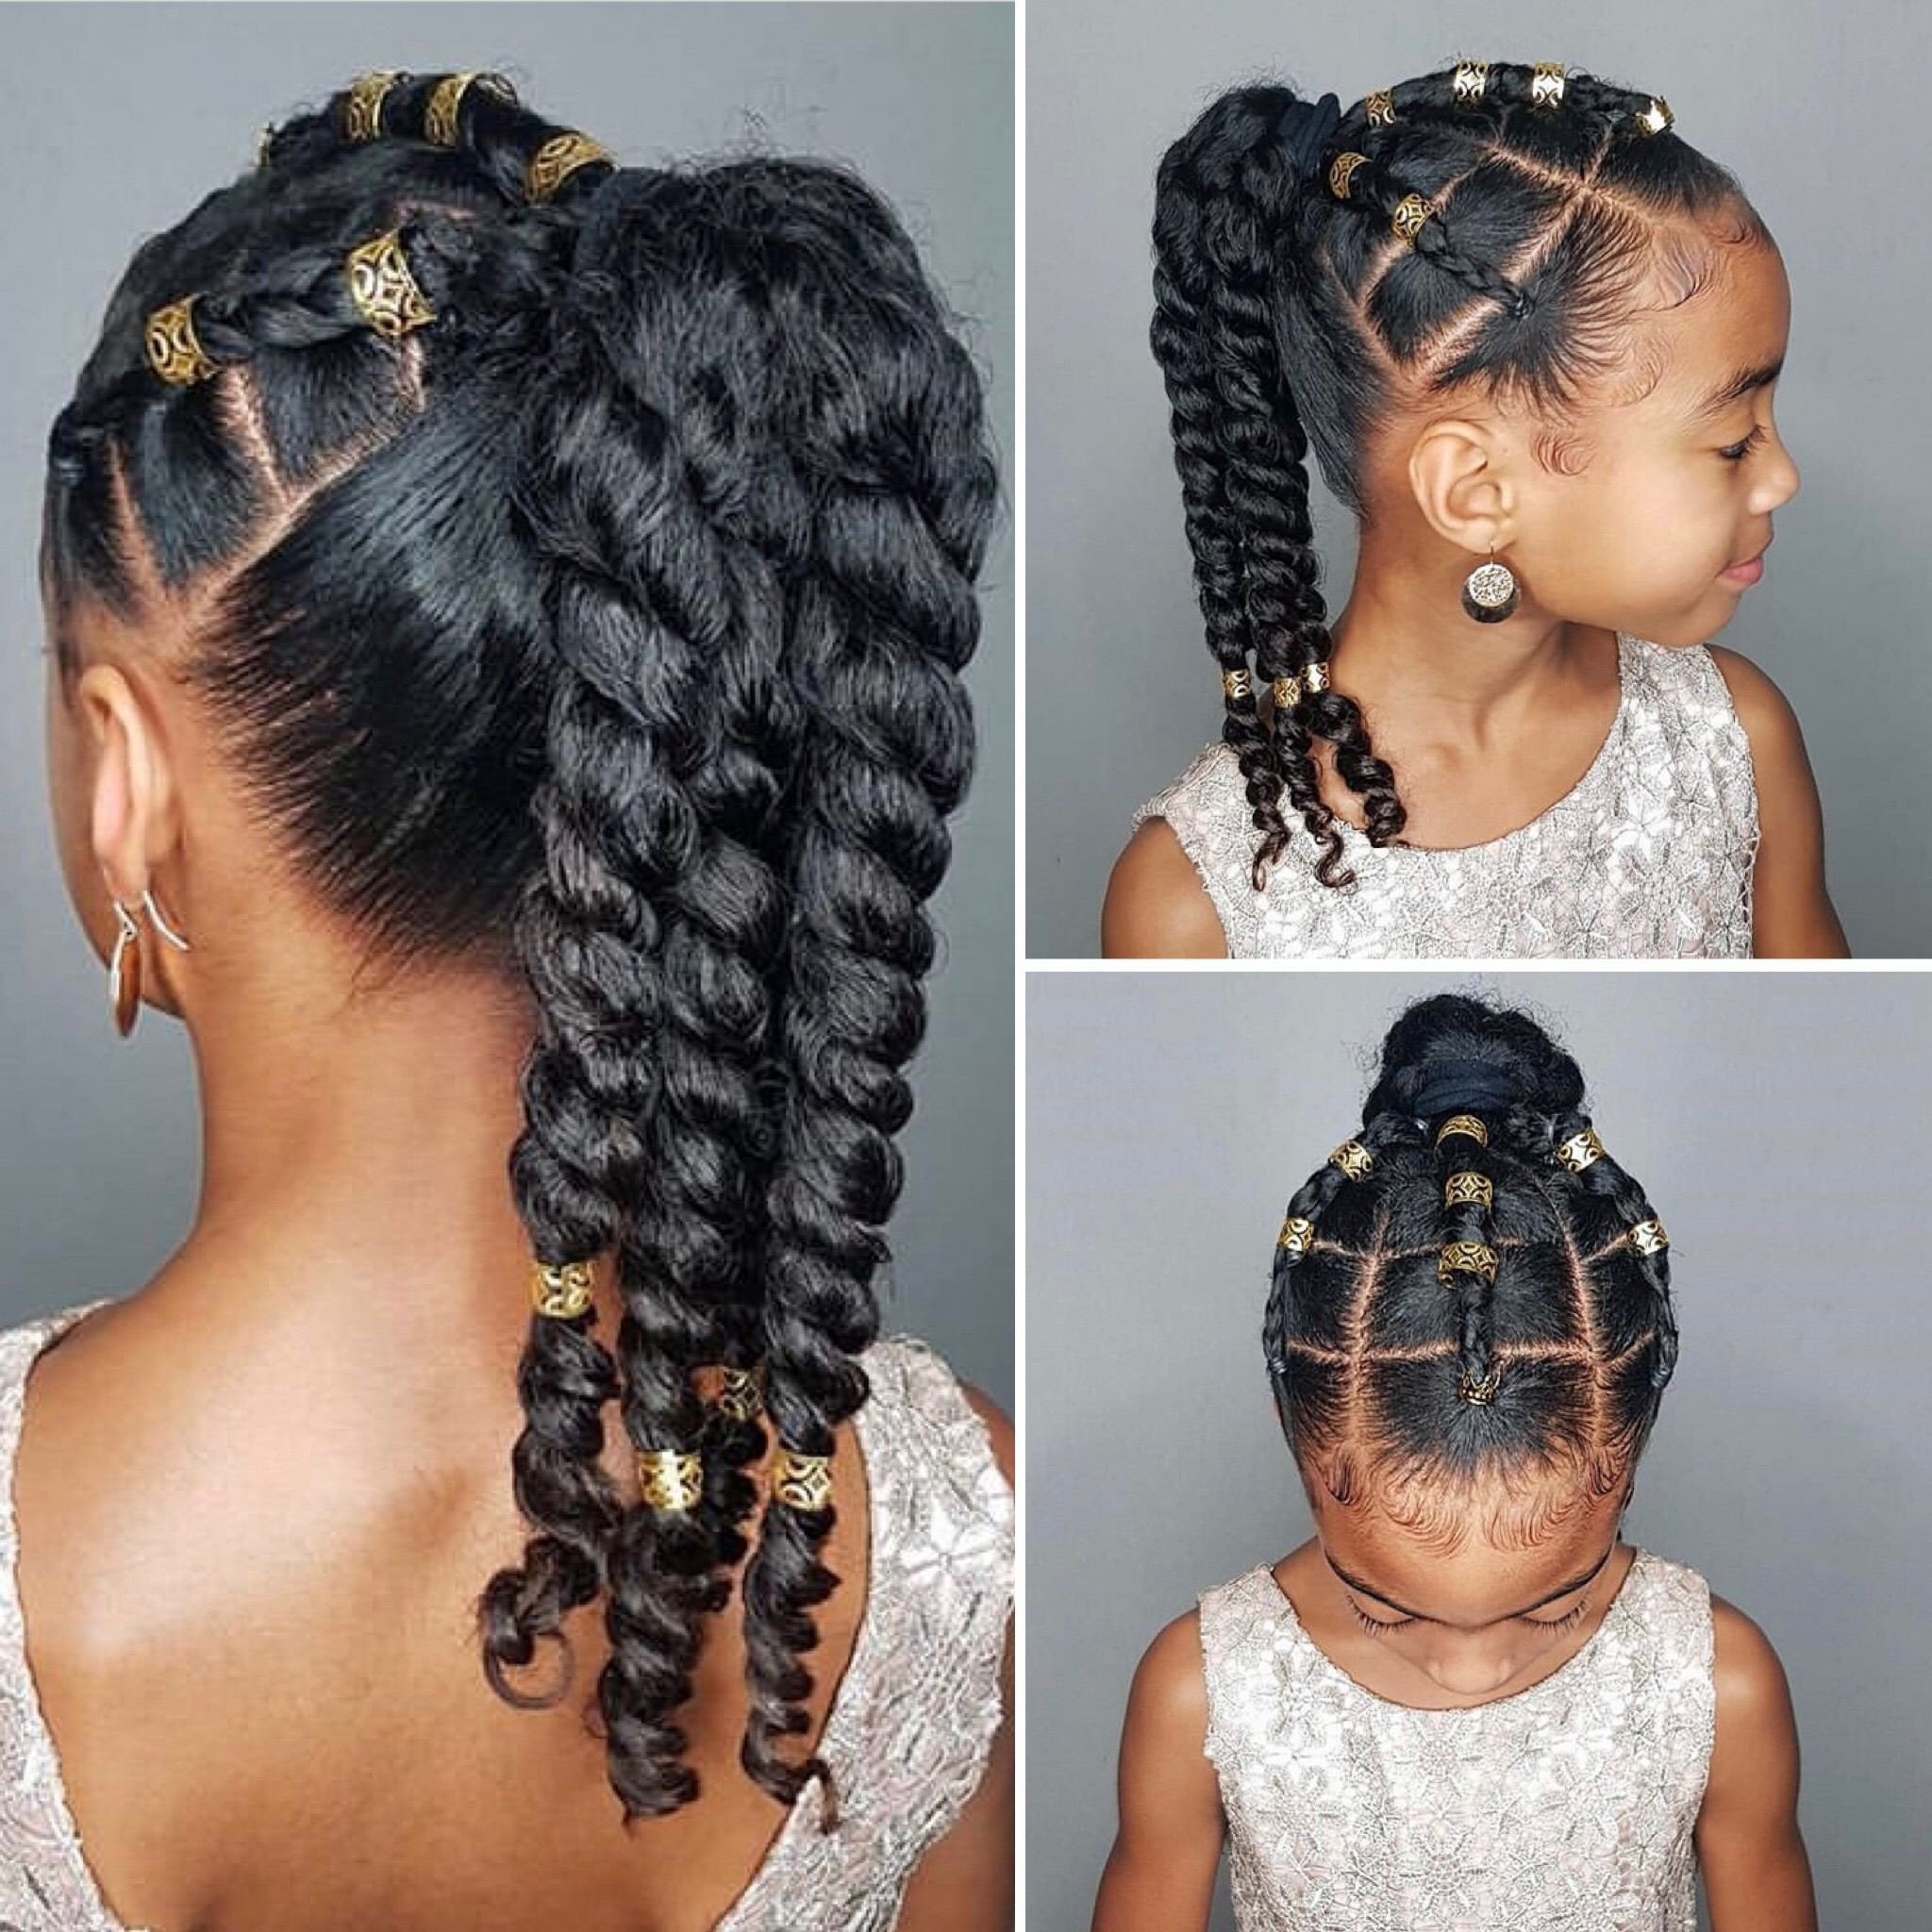 Cute Natural Hairstyles For Little Girls
 Pin by Curls4lyfe on Kids Braids